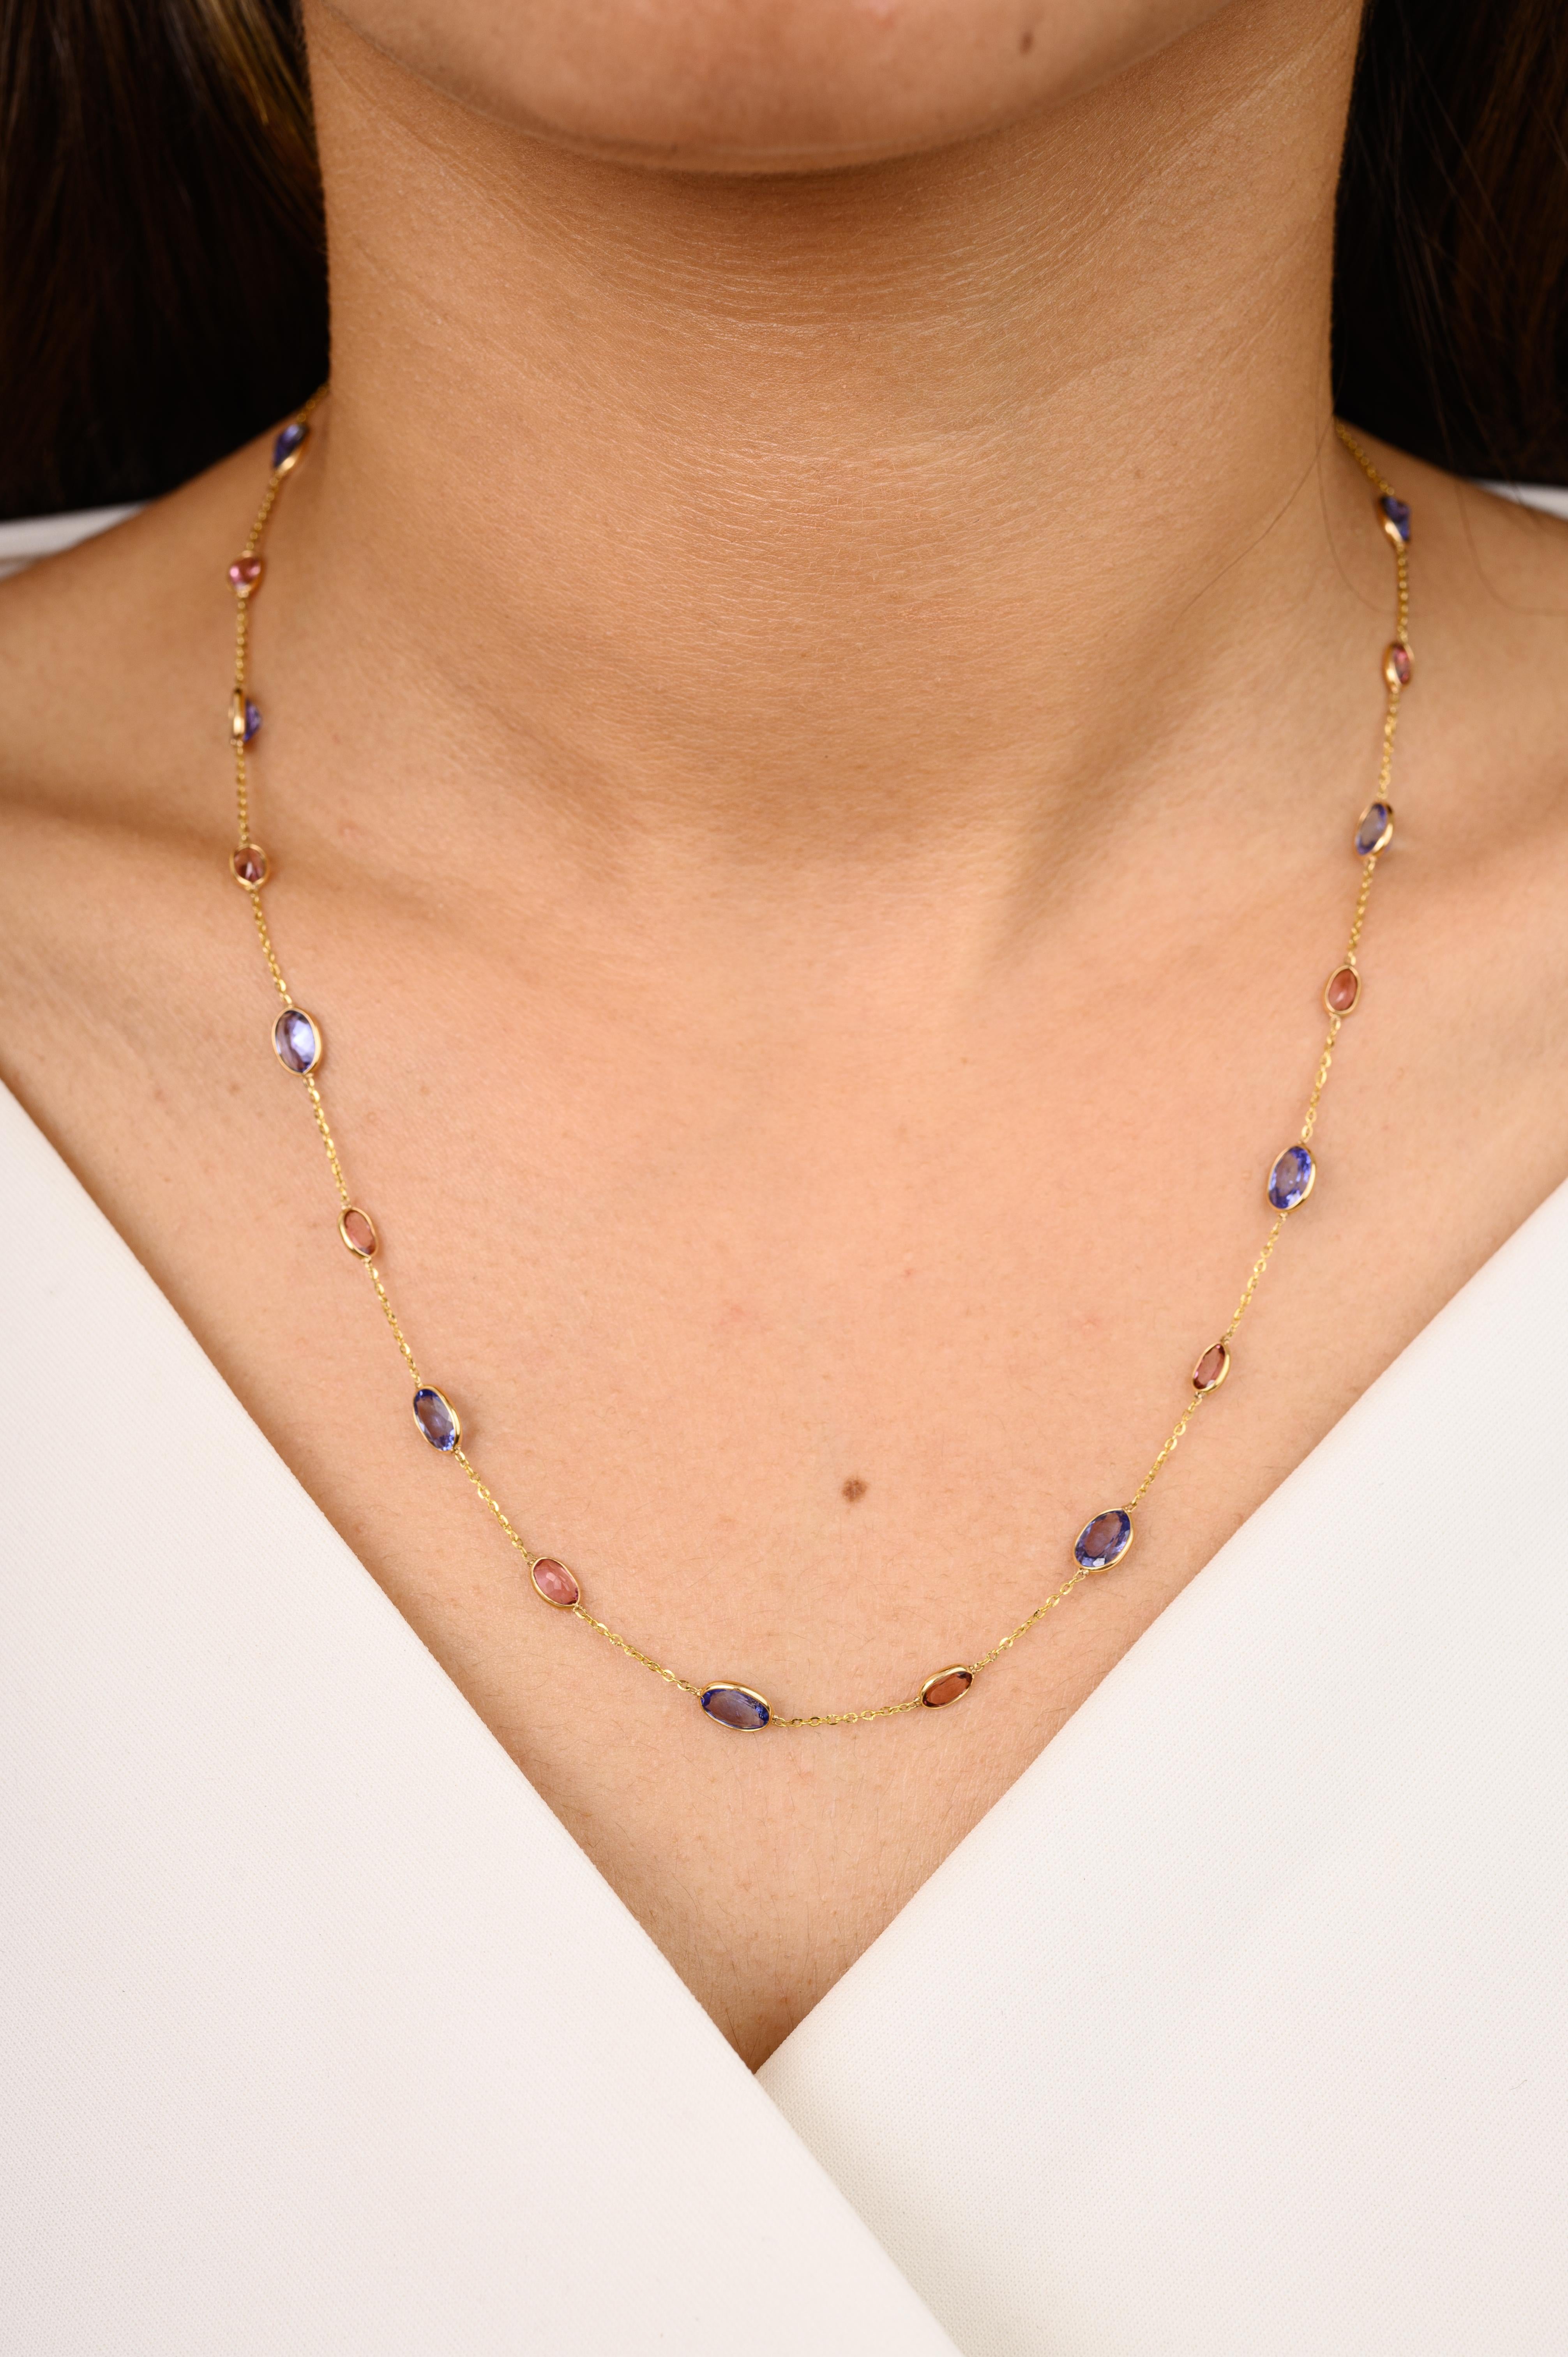 Unique Tanzanite and Tourmaline Station Necklace in 18K Gold studded with oval cut tourmaline and tanzanite. This stunning piece of jewelry instantly elevates a casual look or dressy outfit. 
Tanzanite brings energy, calmness and happiness into life